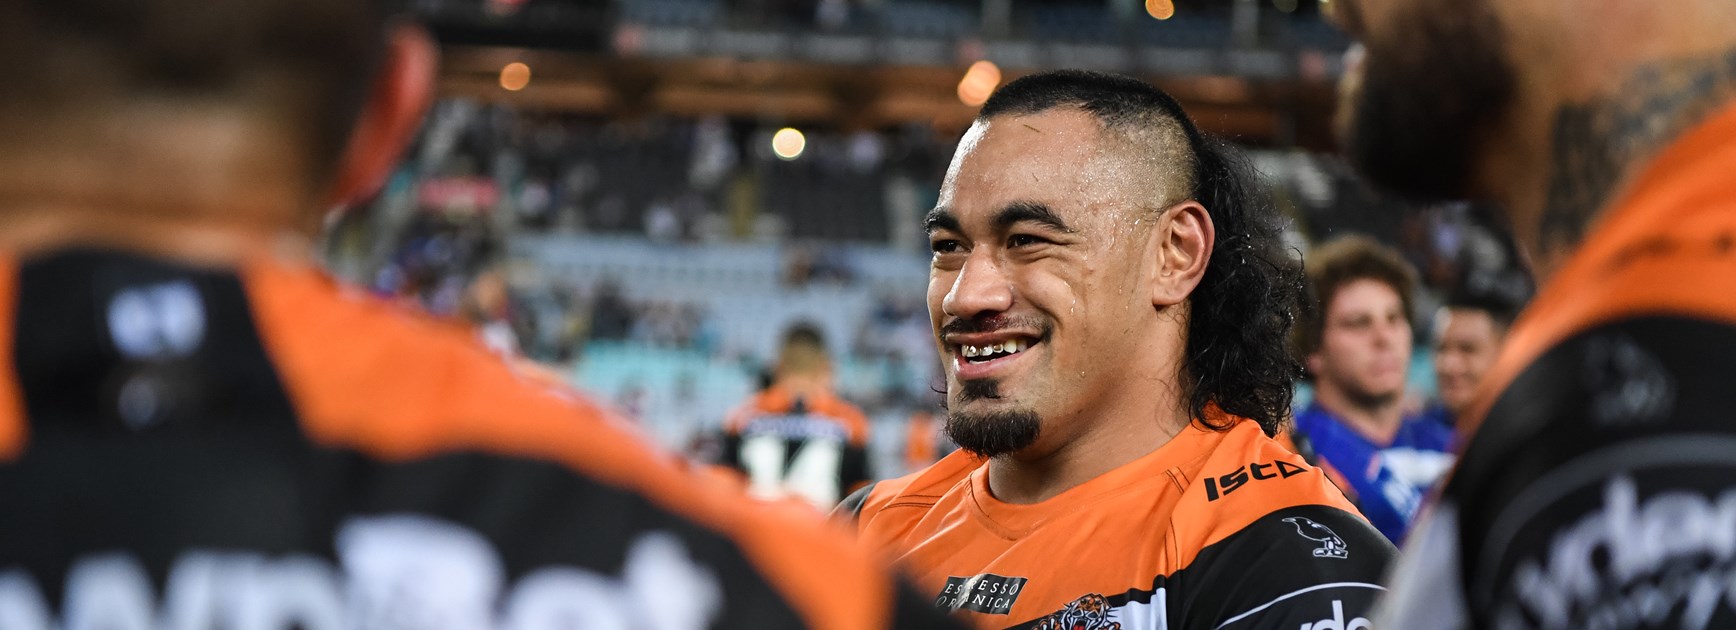 Wests Tigers Results: Round 12